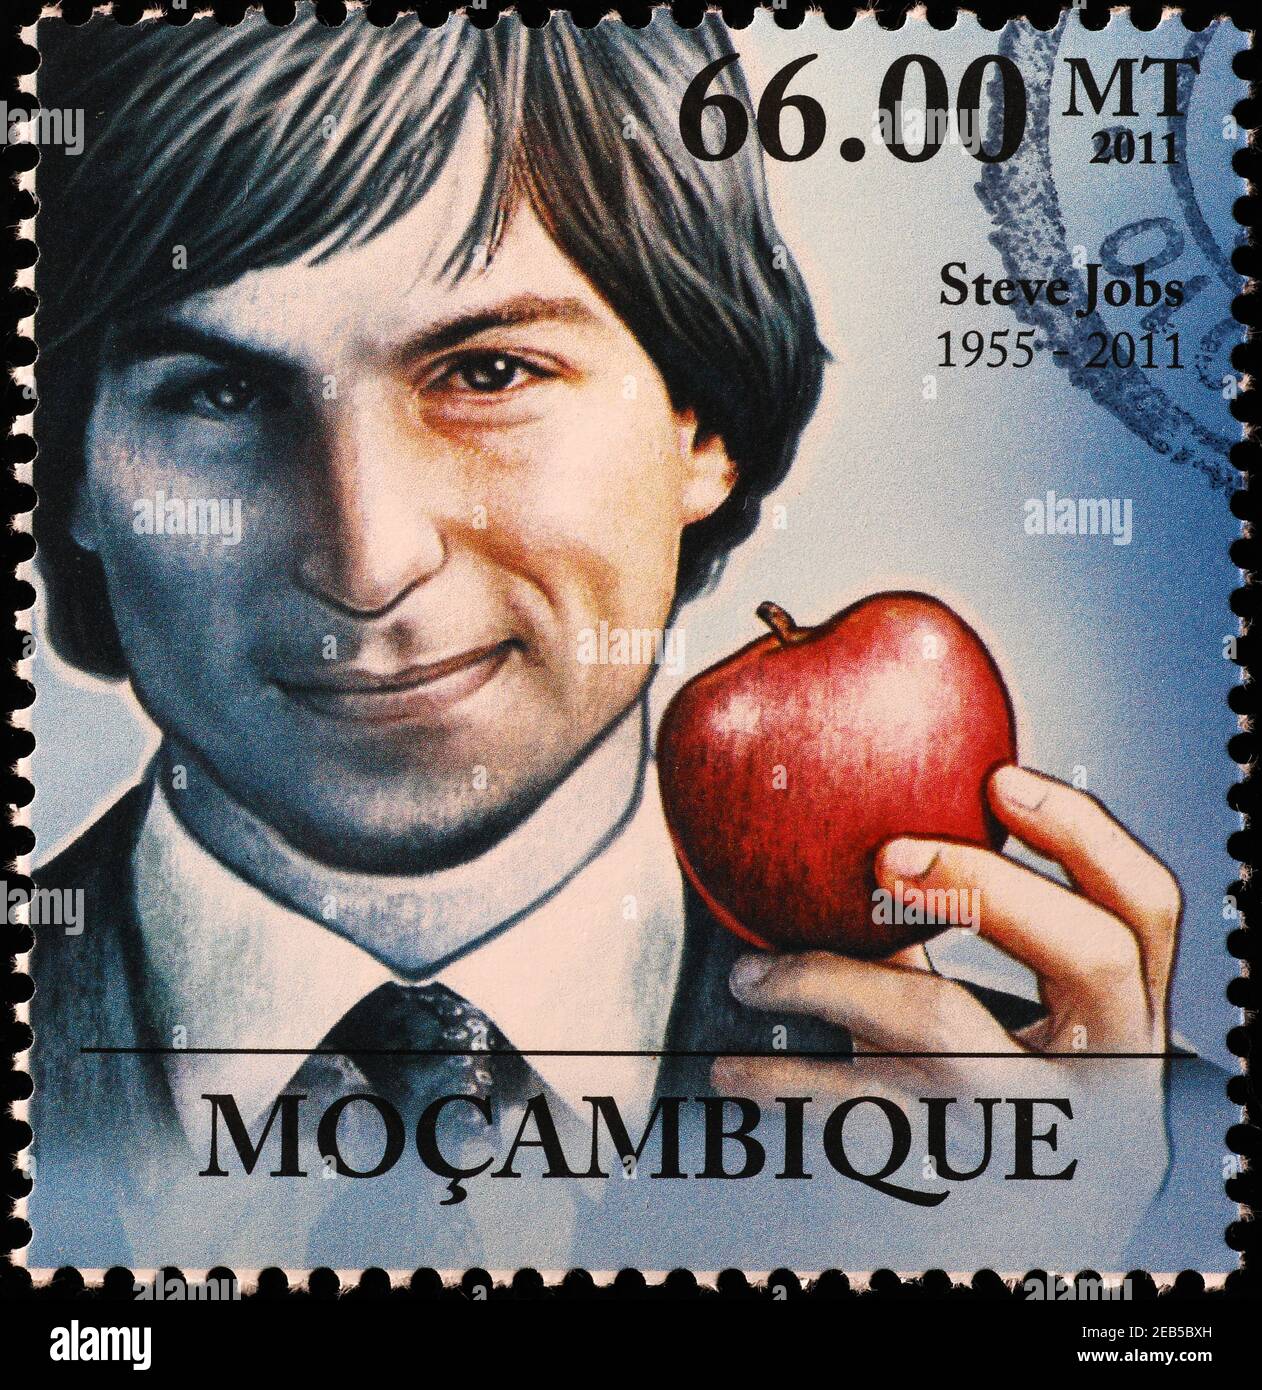 Young Steve Jobs with an apple on postage stamp Stock Photo